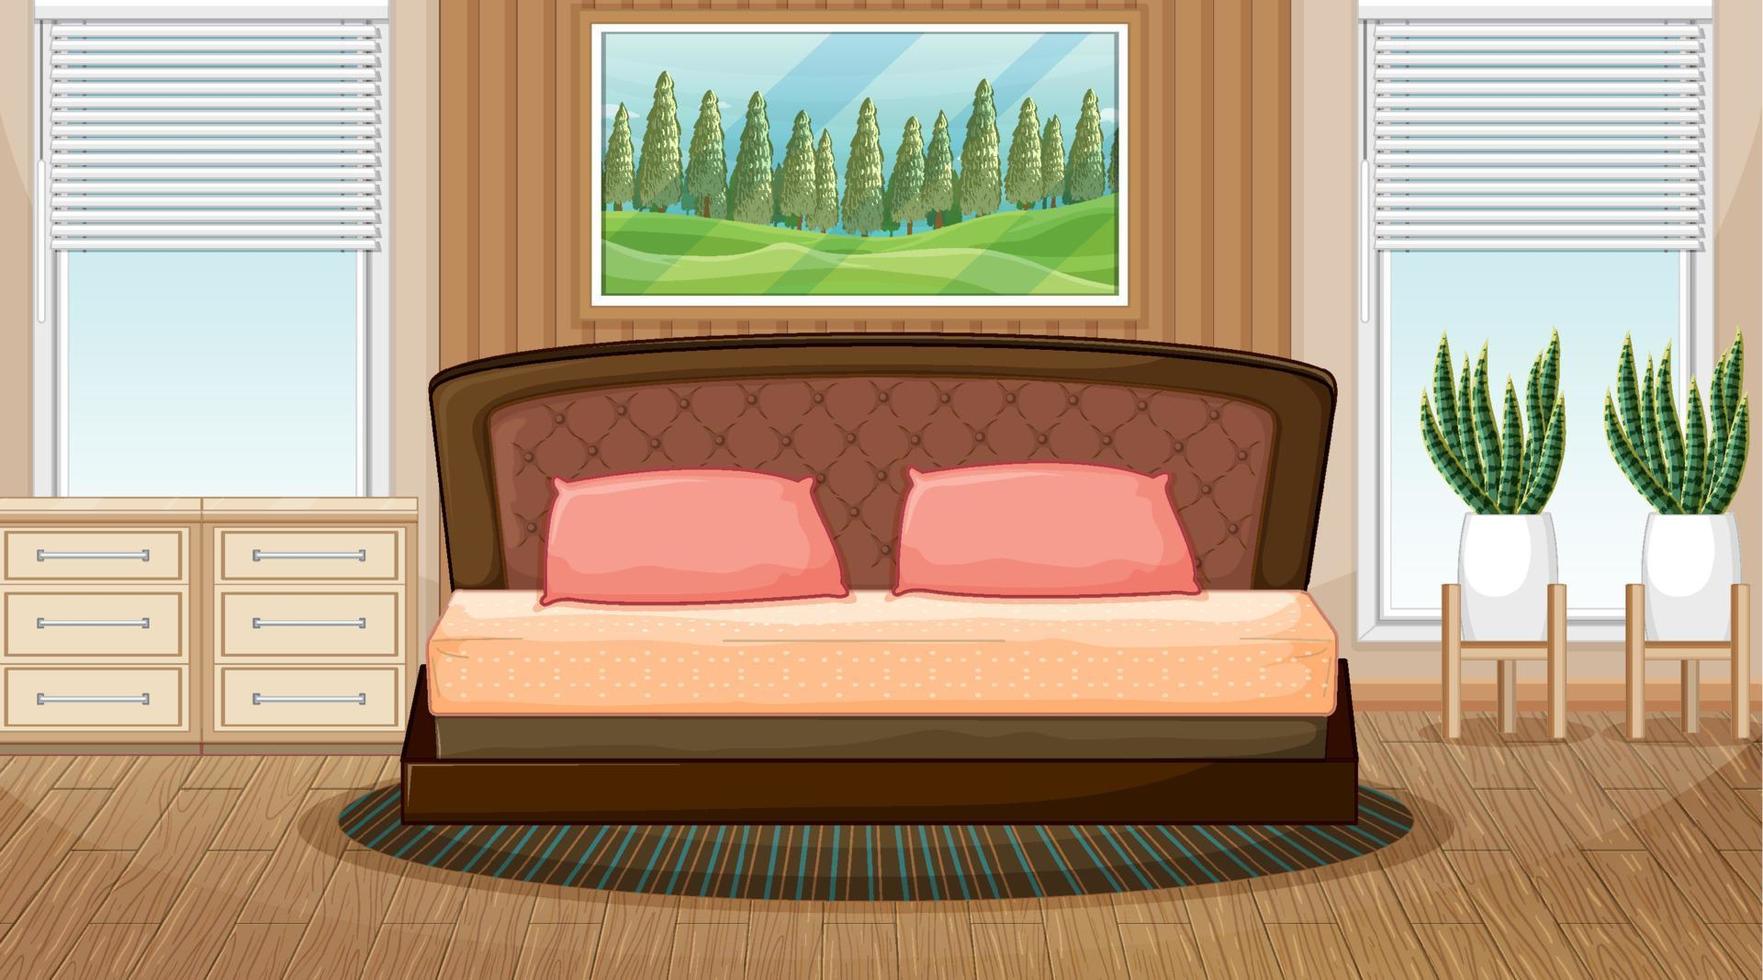 Empty bedroom scene with bedroom objects and interior decoration vector